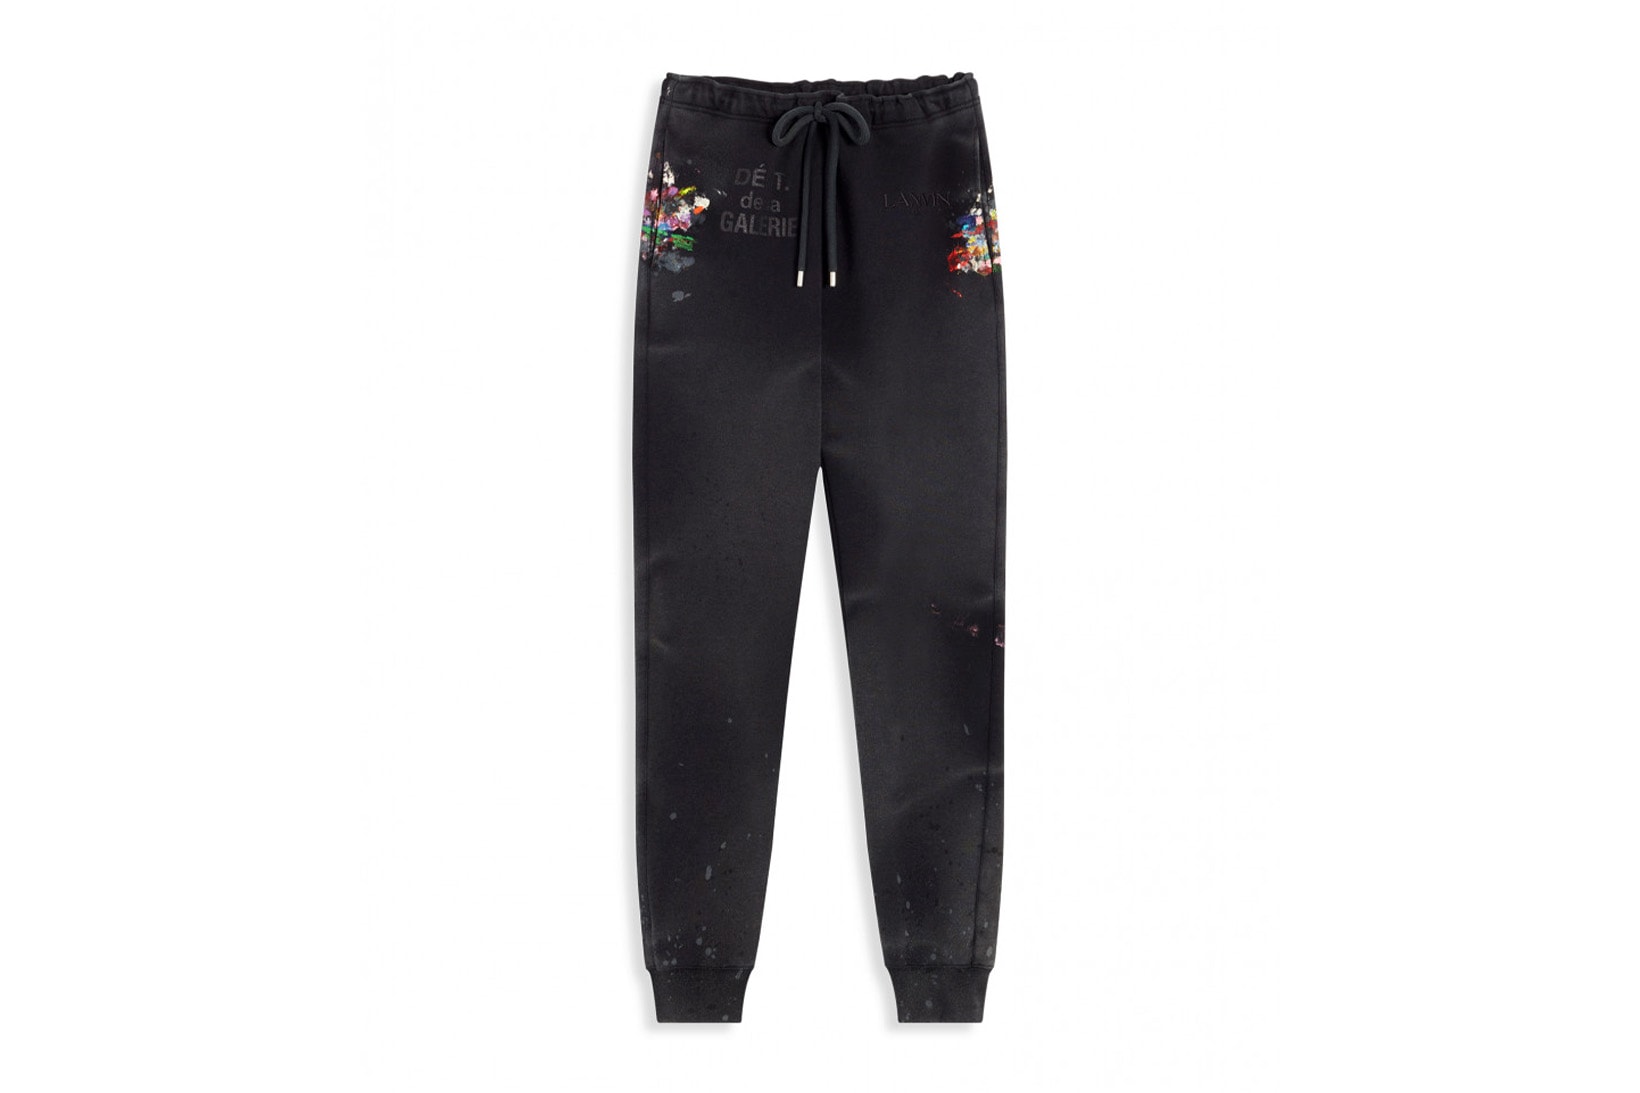 lanvin gallery dept collection hoodies sneakers t-shirts tees release info sweatpants black